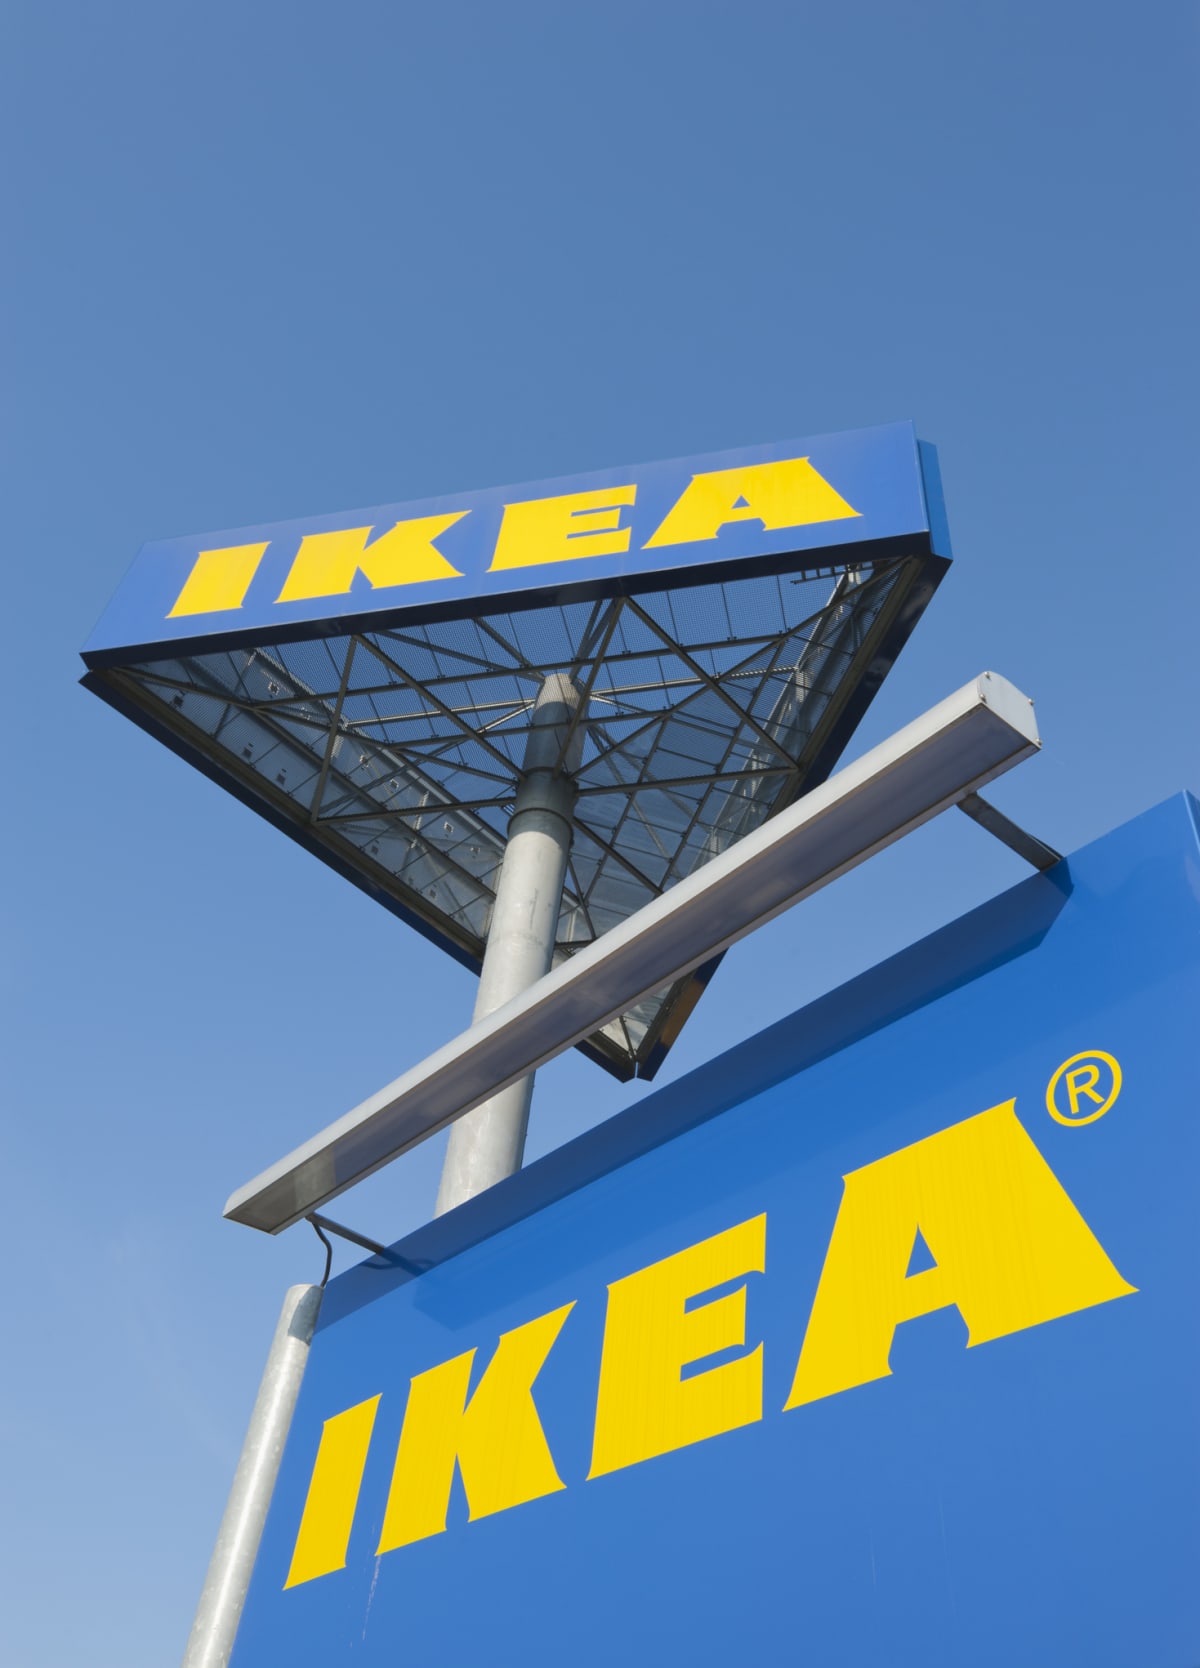 Sign of an IKEA furniture store in Zurich